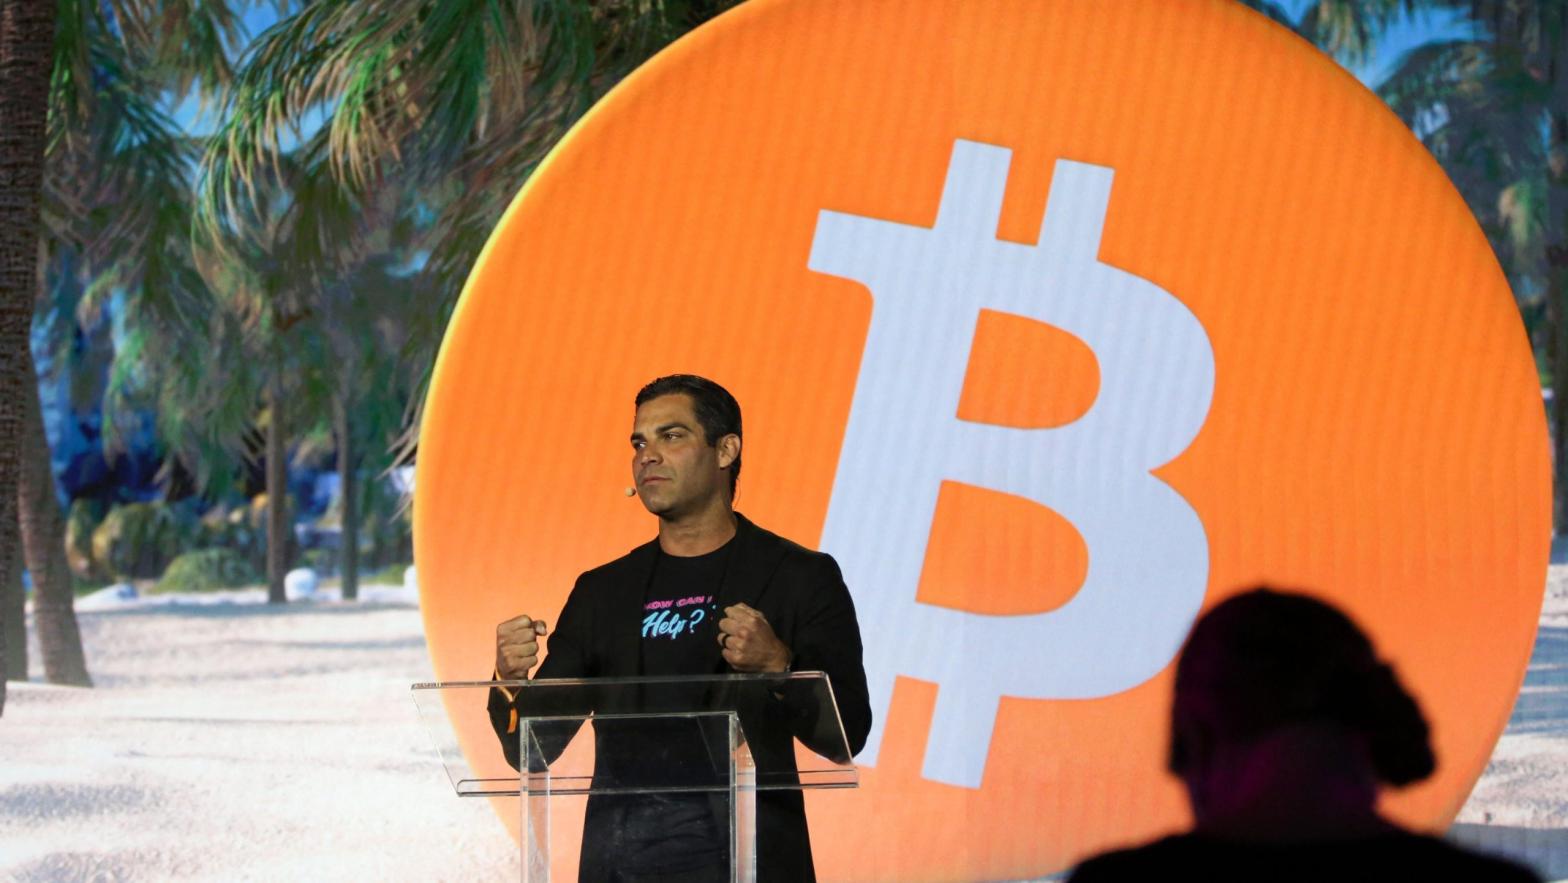 Miami Mayor Francis Suarez speaks onstage during the Bitcoin 2021 Convention at the Mana Convention Centre in Miami. (Photo: Marco Bello/AFP, Getty Images)